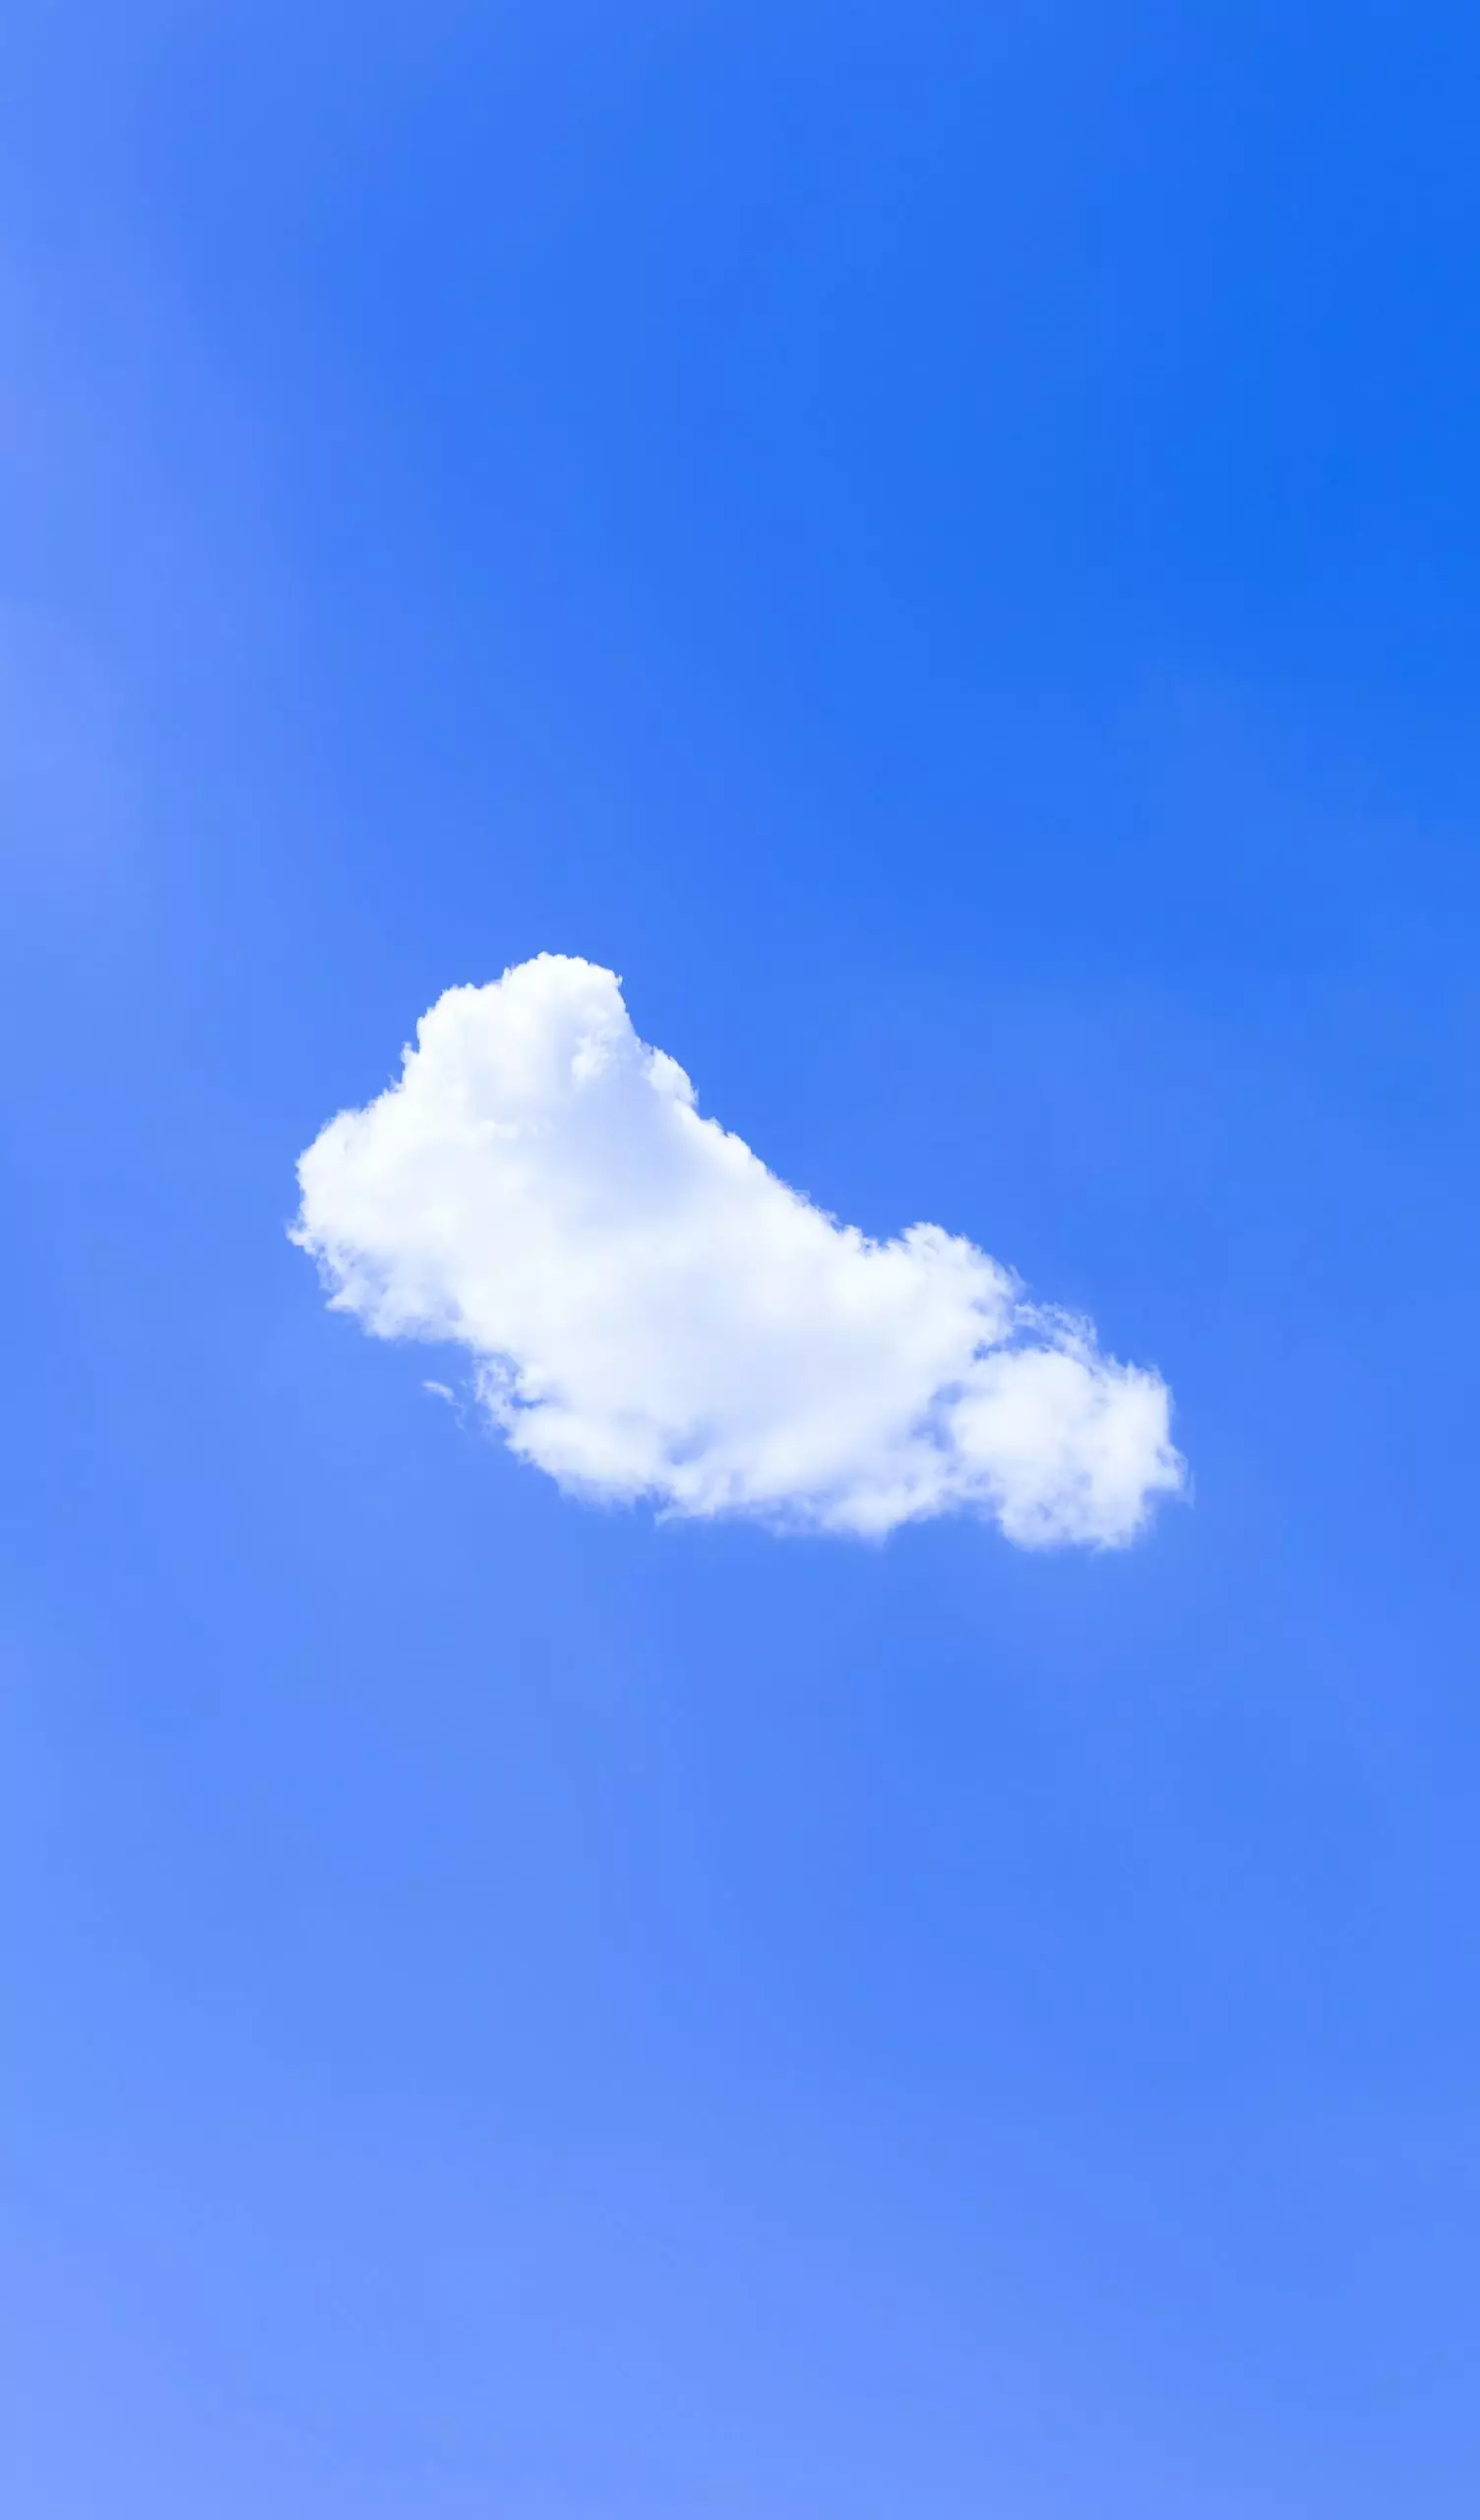 A lonely cloud